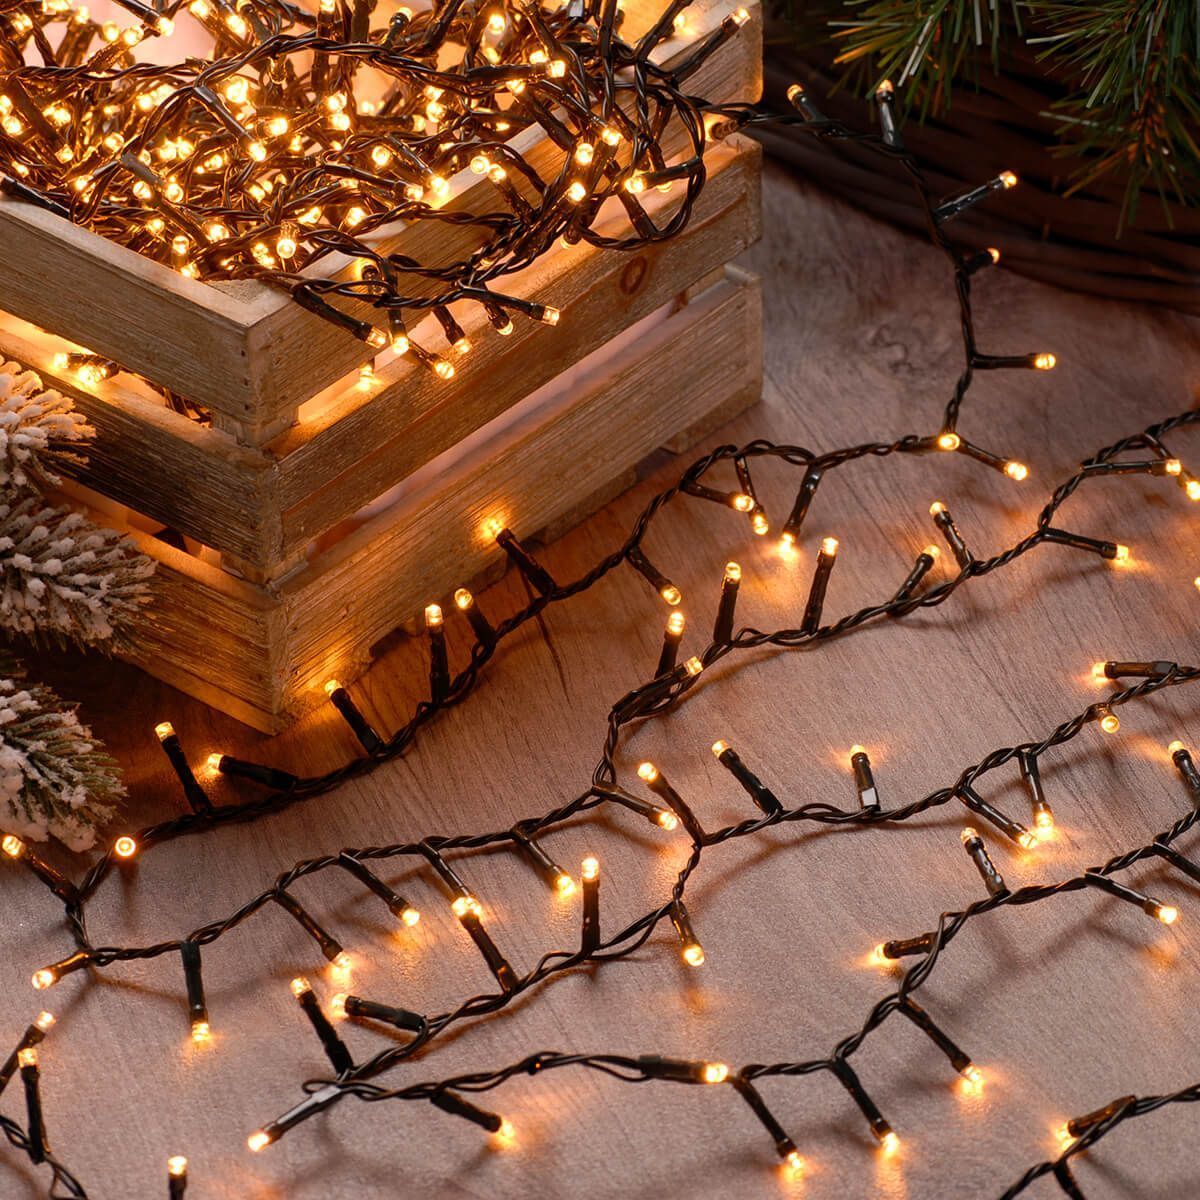 300 Firefly Lights - Traditional Warm White